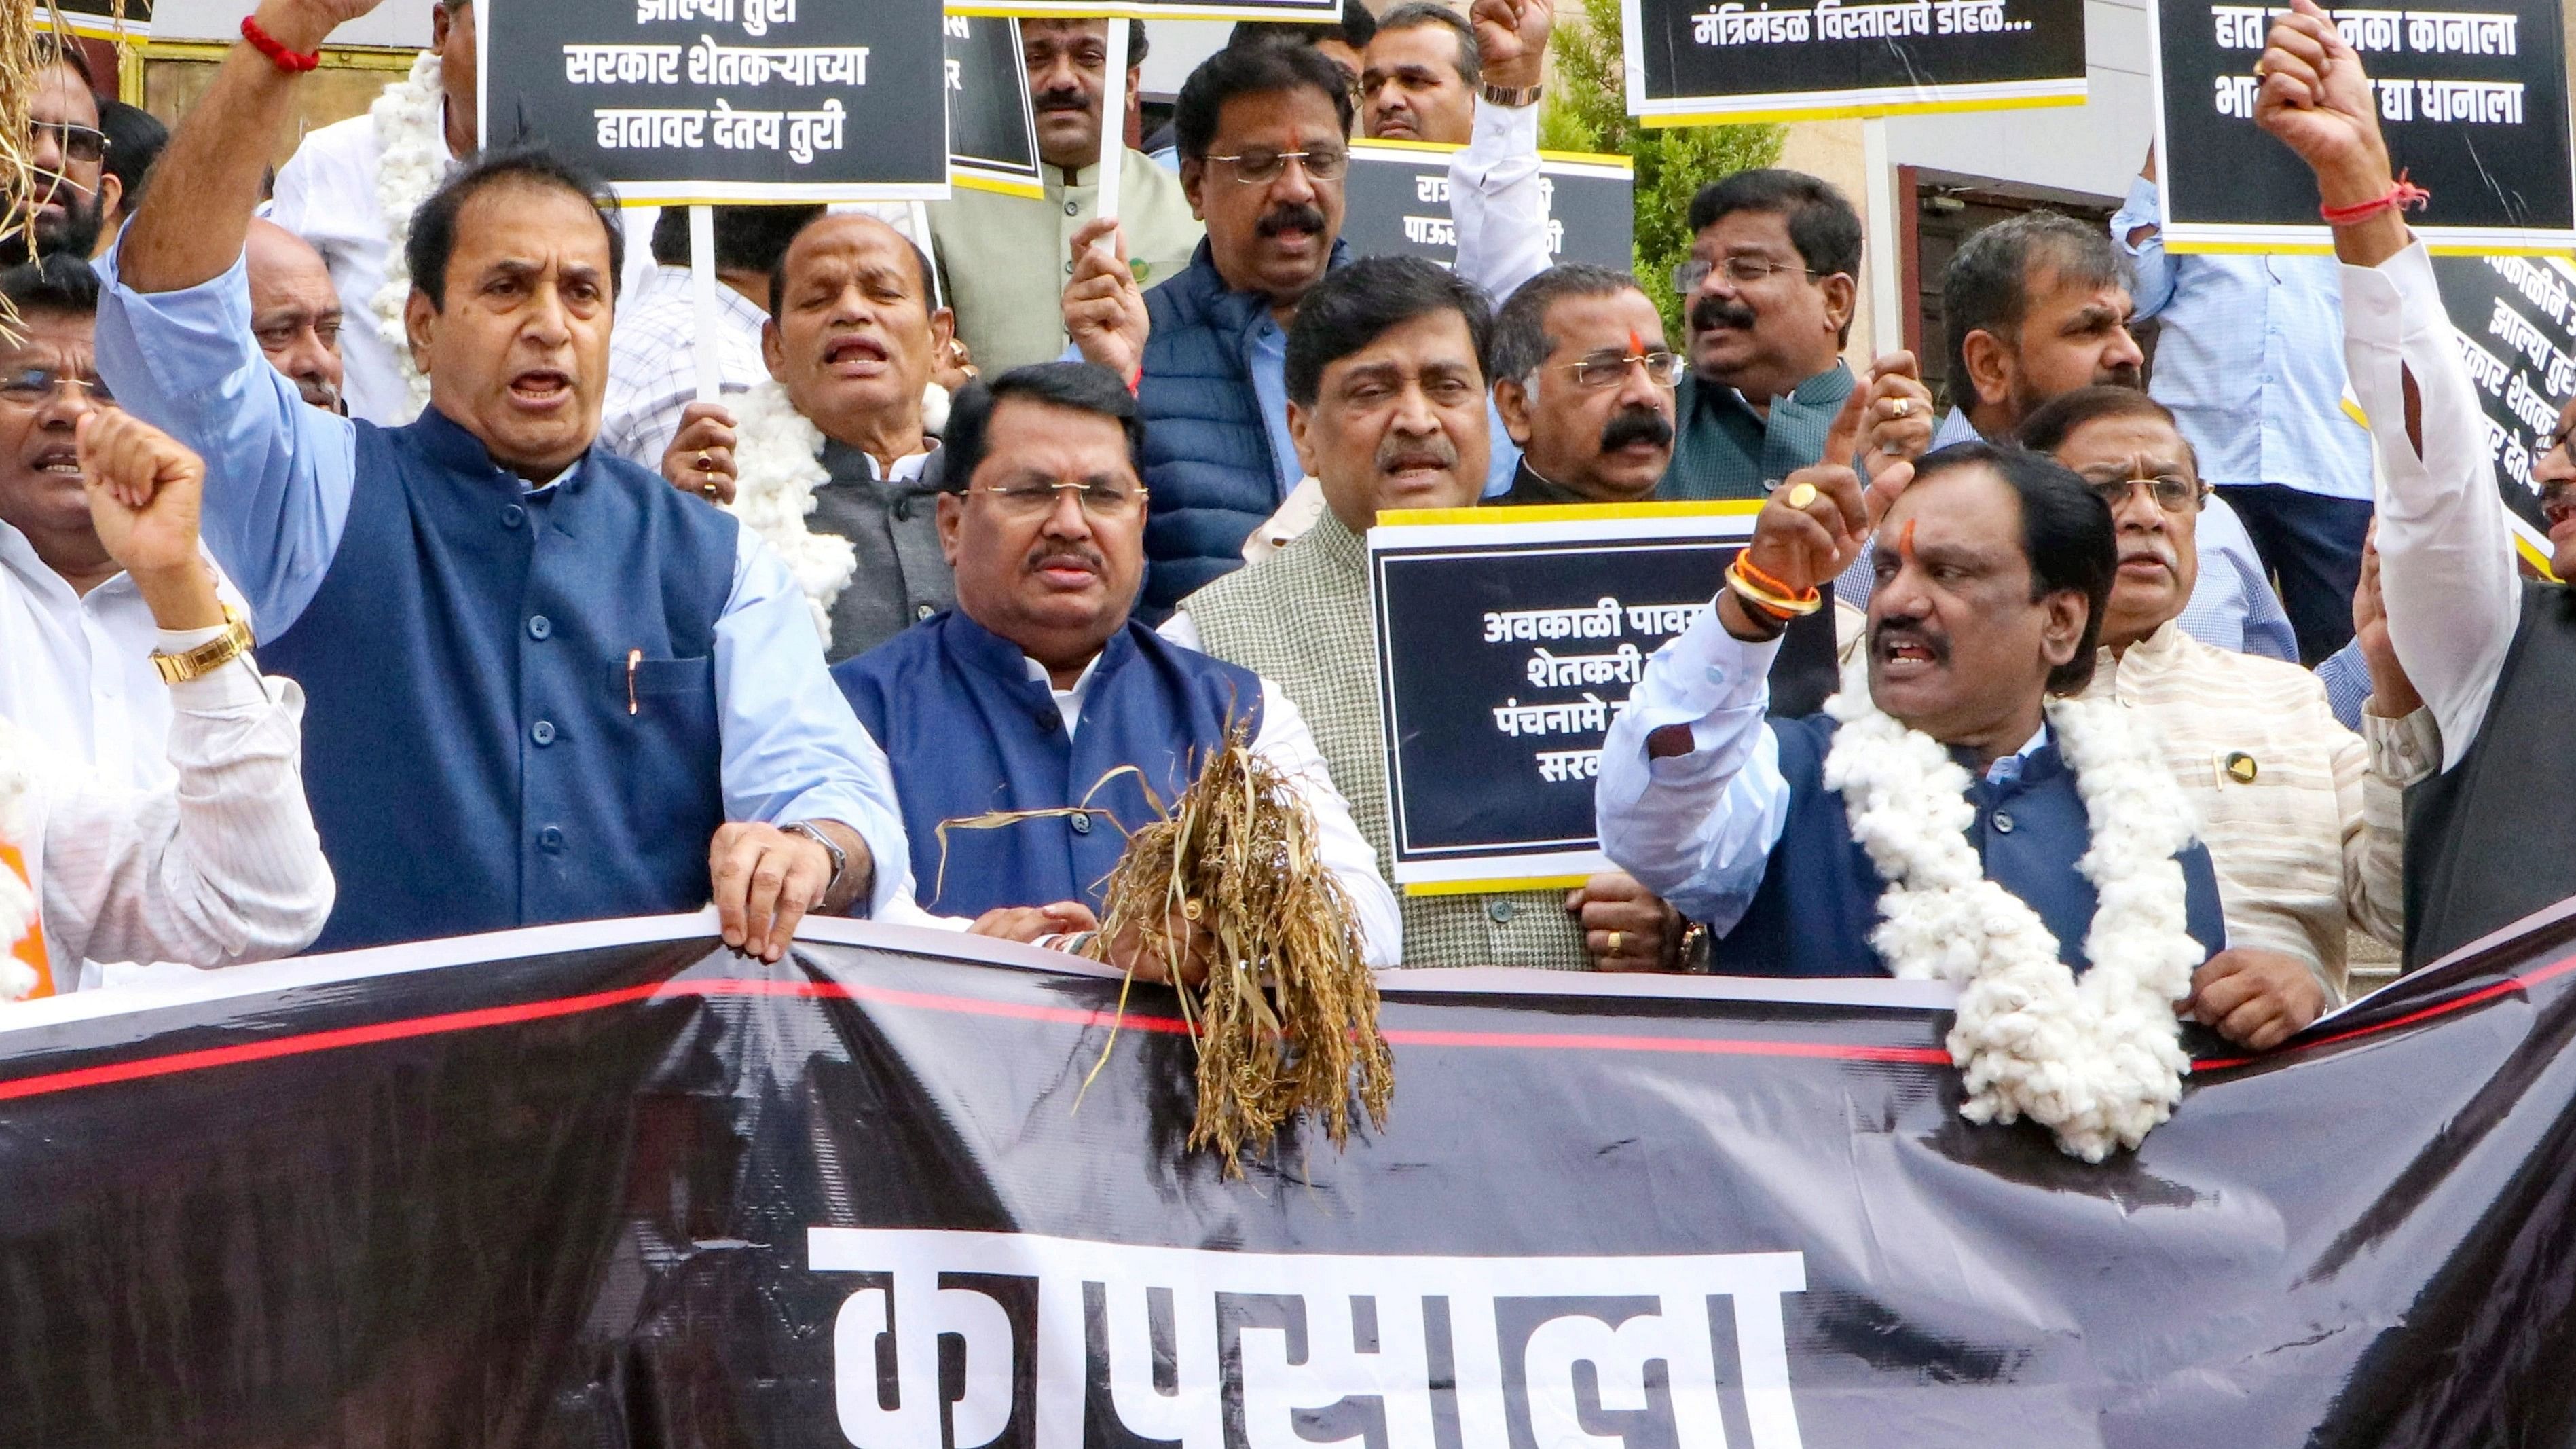 <div class="paragraphs"><p>Opposition MLAs protests against Maharashtra government on issues faced by farmers and its demands for higher MSP for cotton, better prices for onions and farm loan waiver during the Winter Session of Maharashtra state Assembly at Vidhan Bhavan, in Nagpur.</p></div>